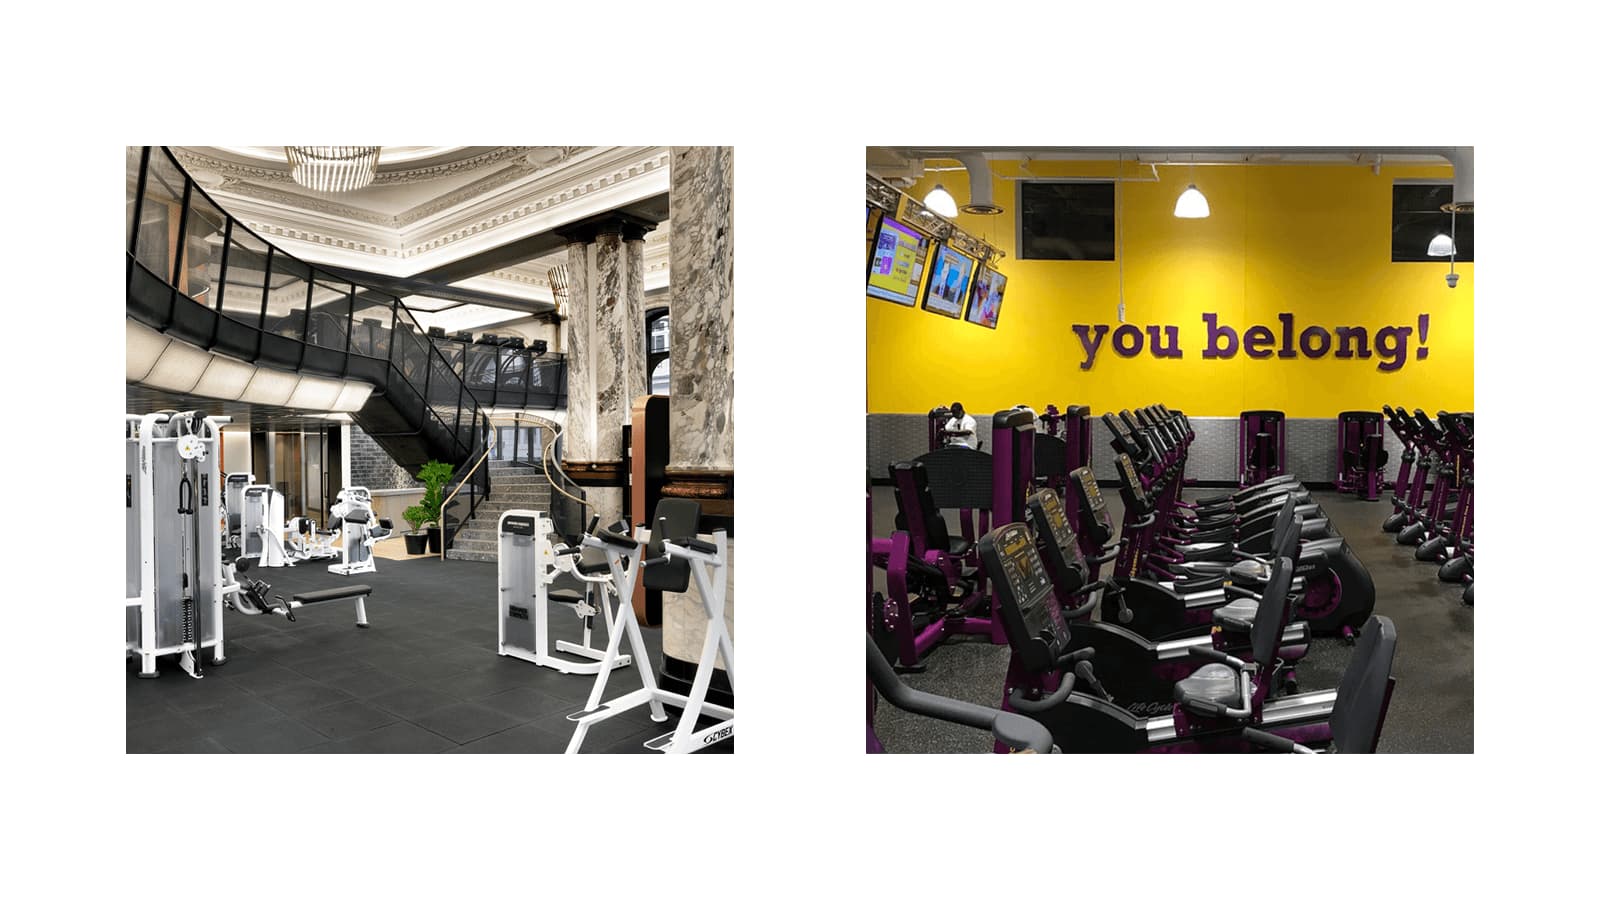 Equinox location in London juxtaposed to Planet Fitness location